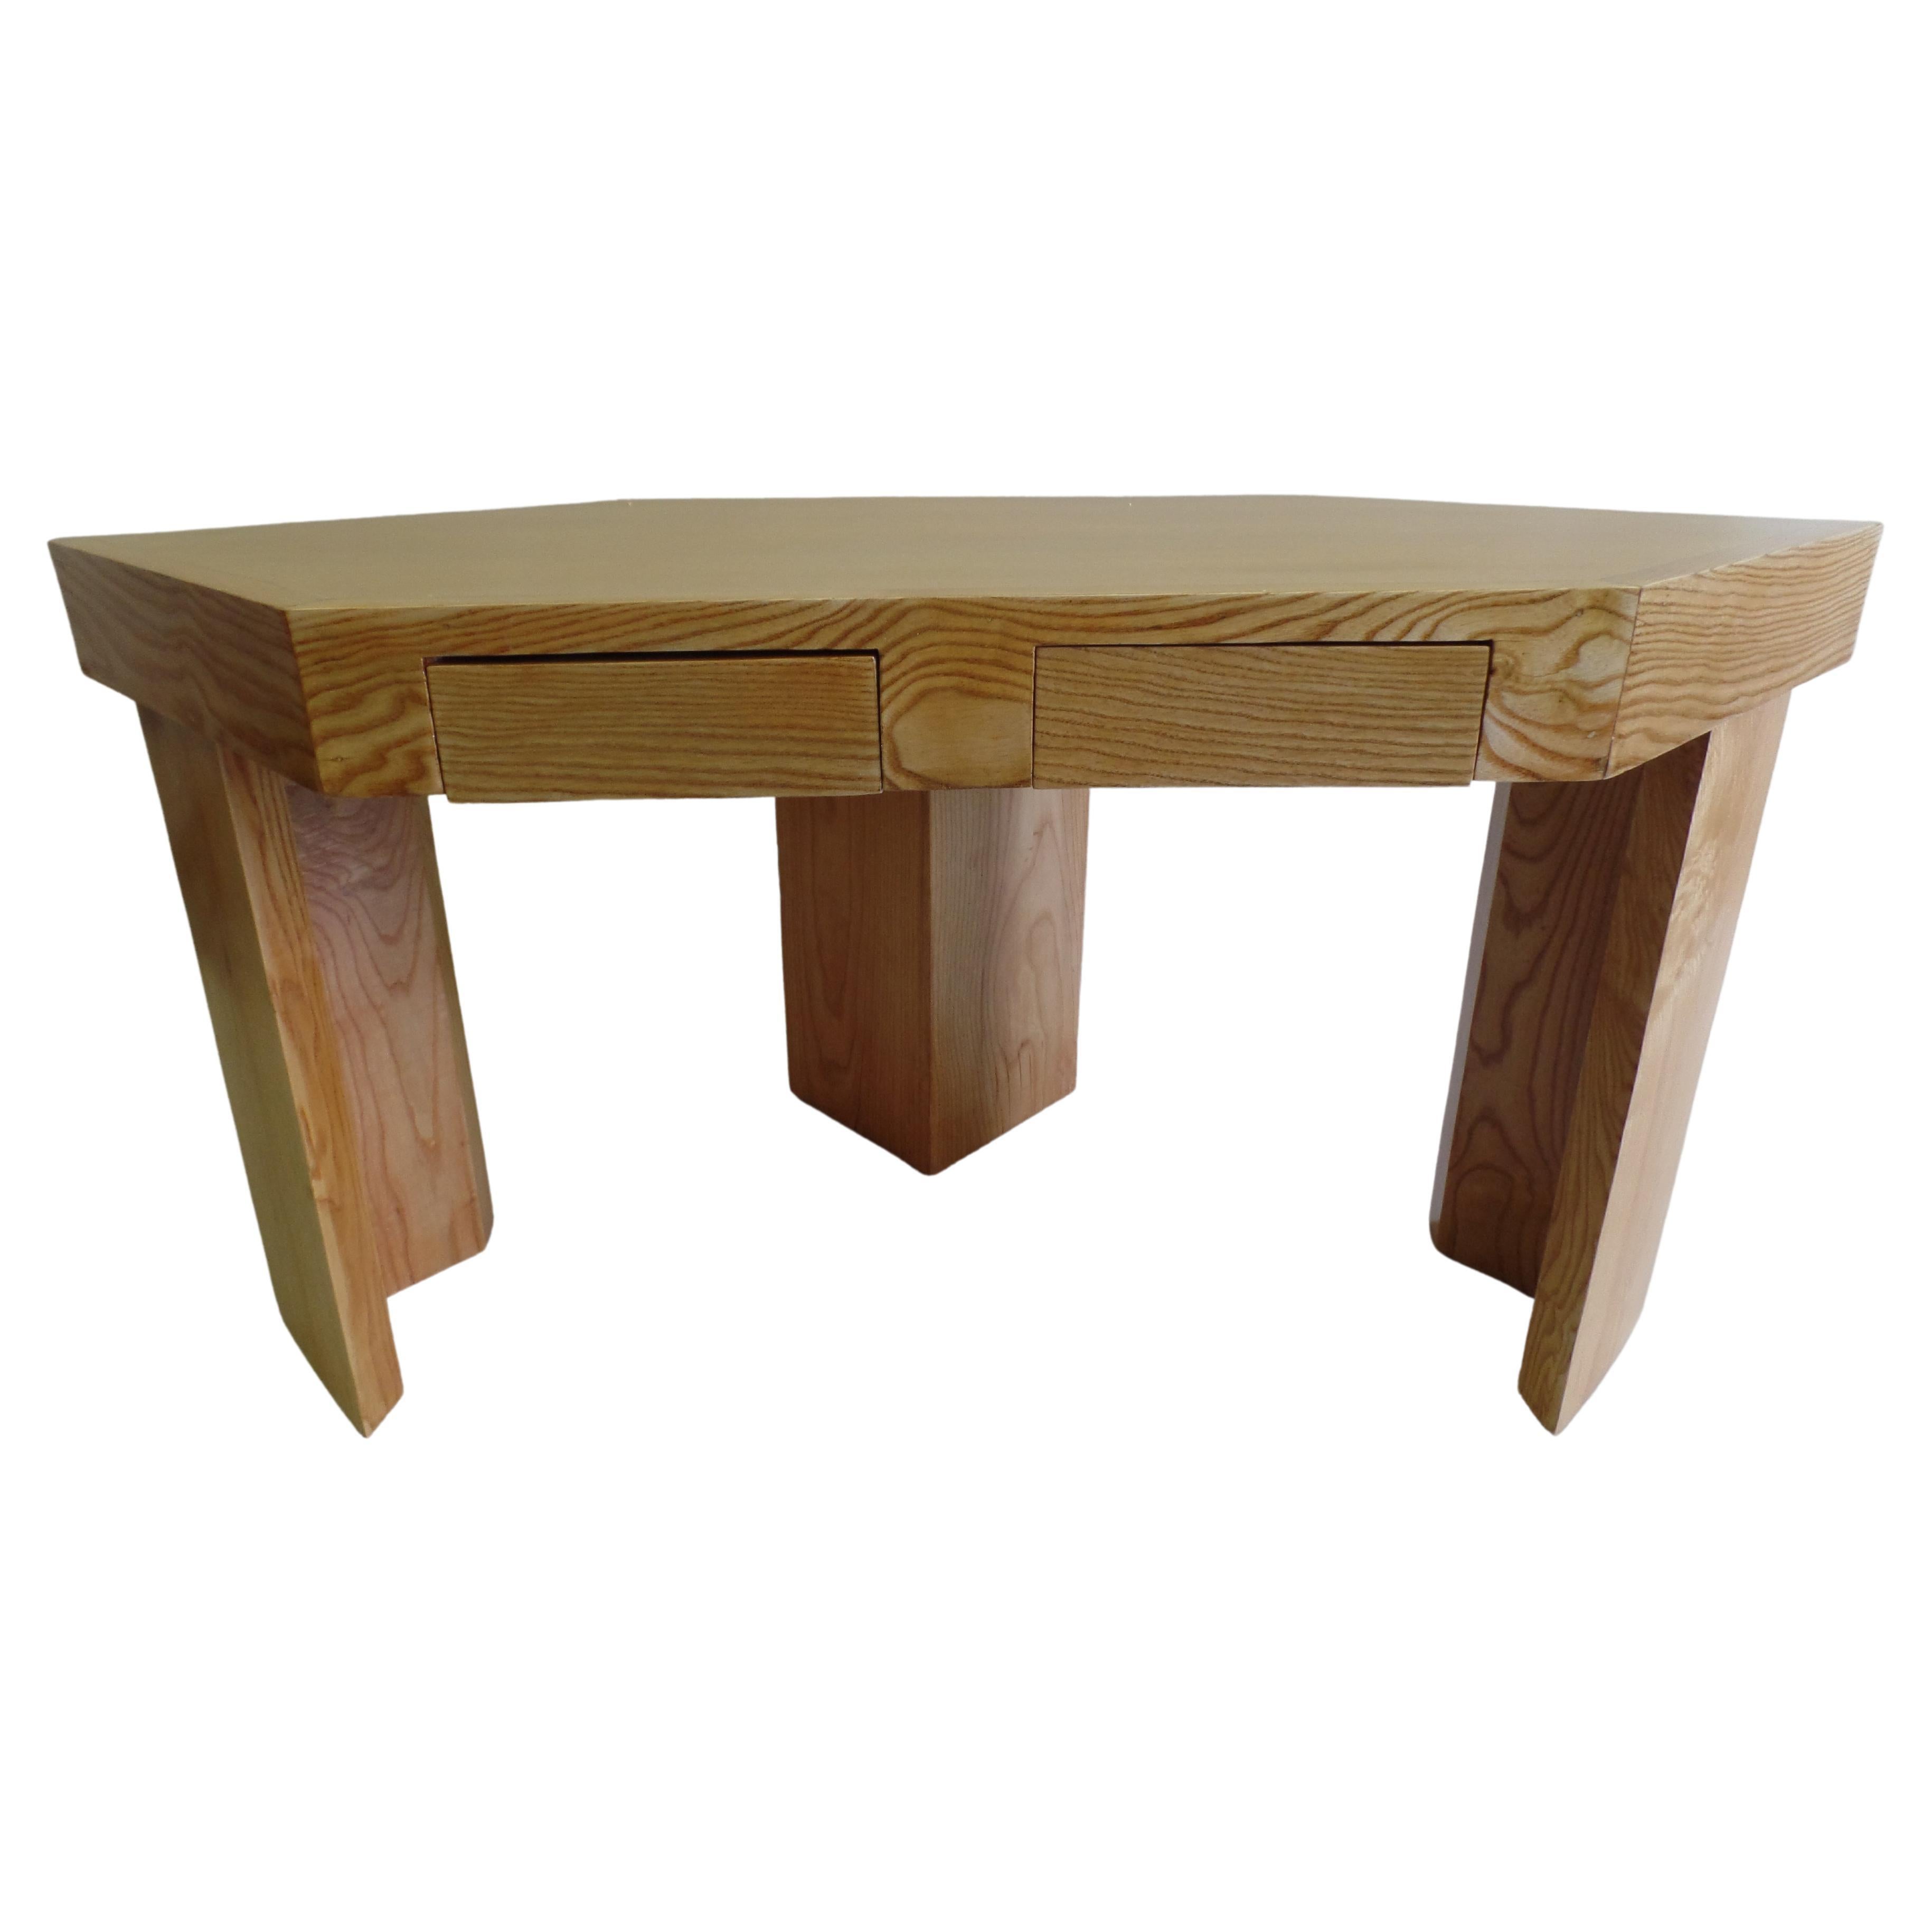  French Futurist / Mid-Century Modern Trapezoid Desk by Alain Marcoz, circa 1956 For Sale